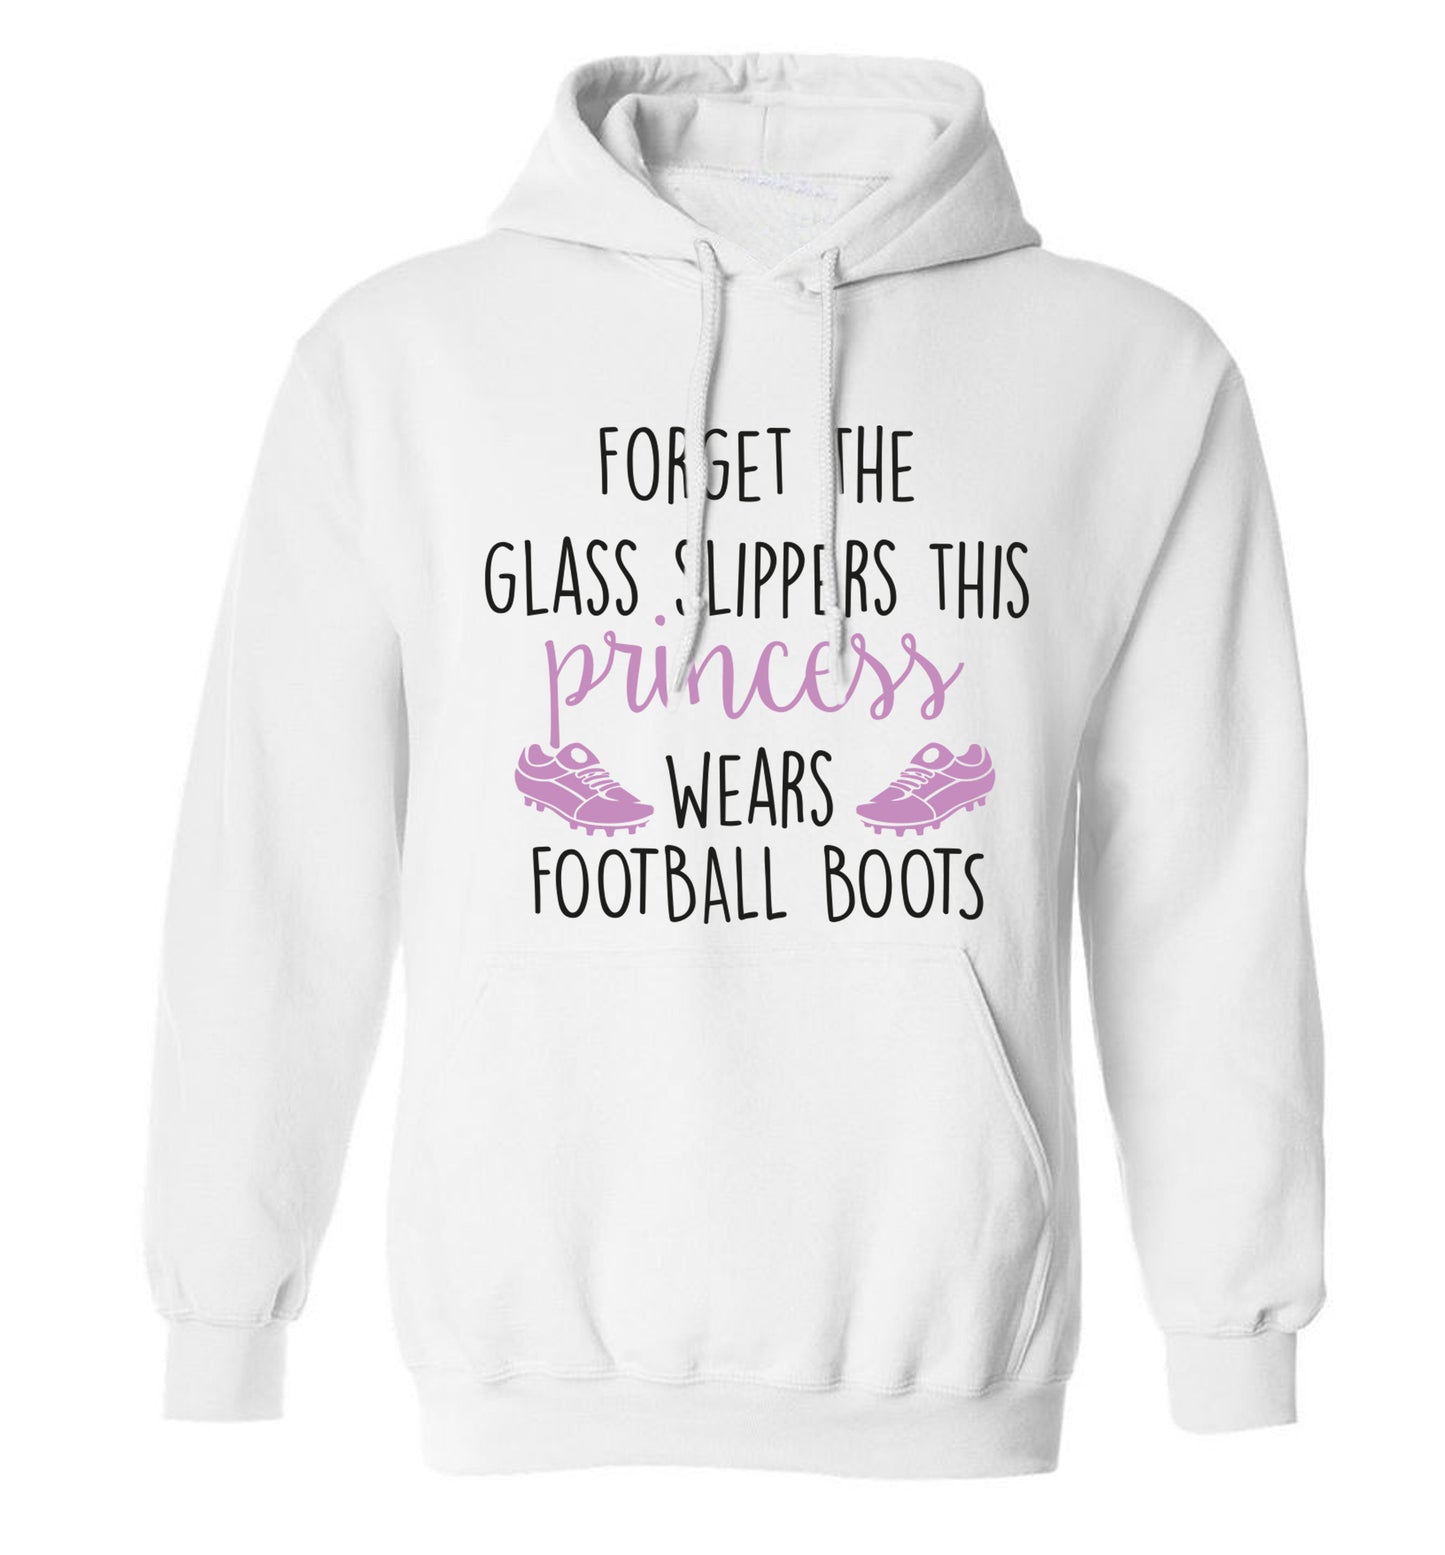 Forget the glass slippers this princess wears football boots adults unisex white hoodie 2XL